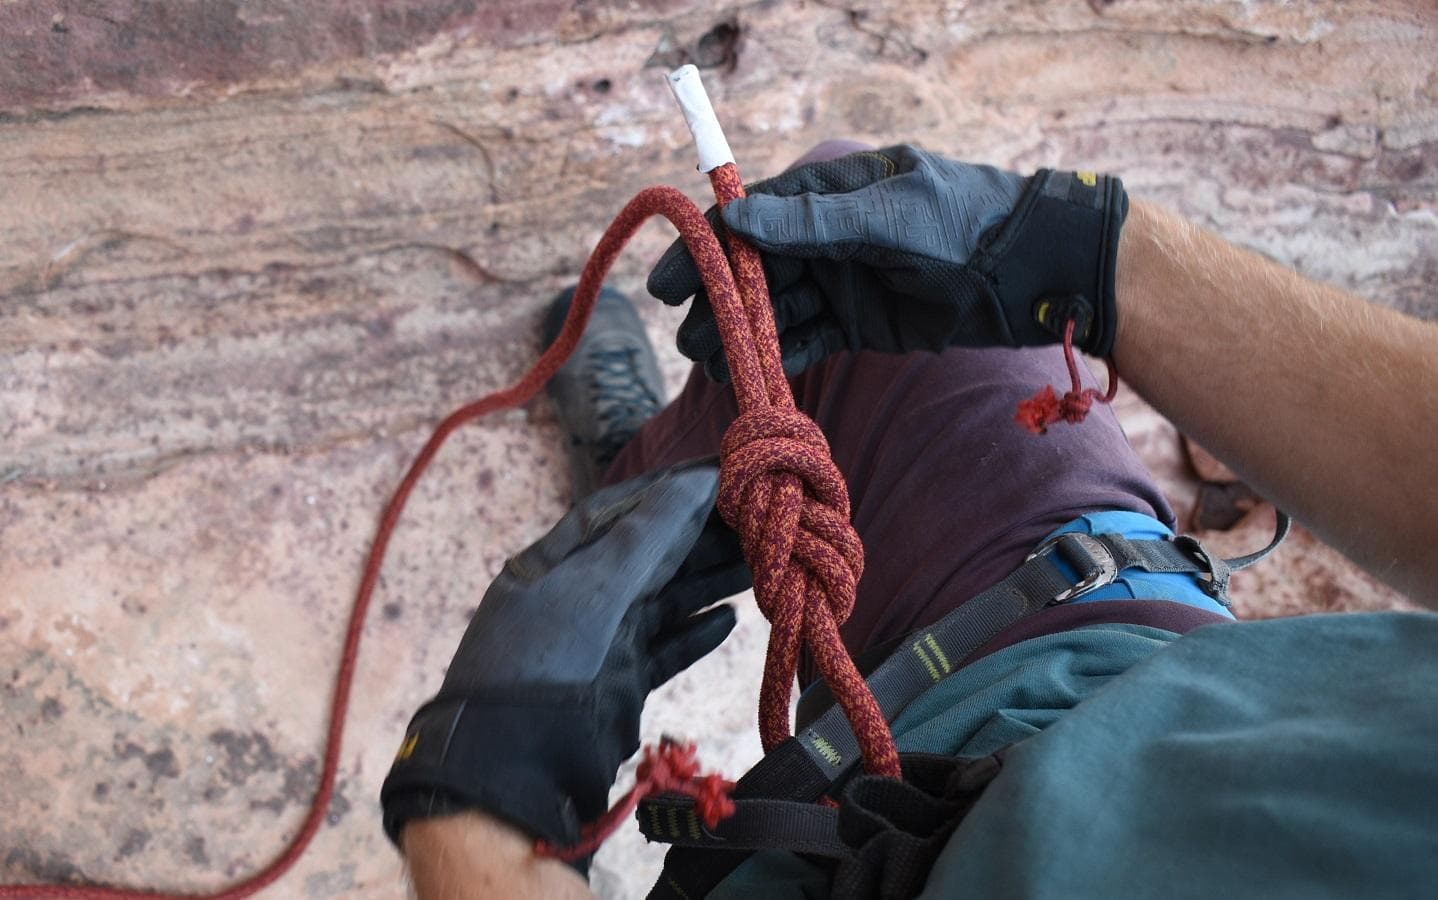 Climber tied in with a figure 8 follow-through knot through both hardpoints and with 6 inches of tail